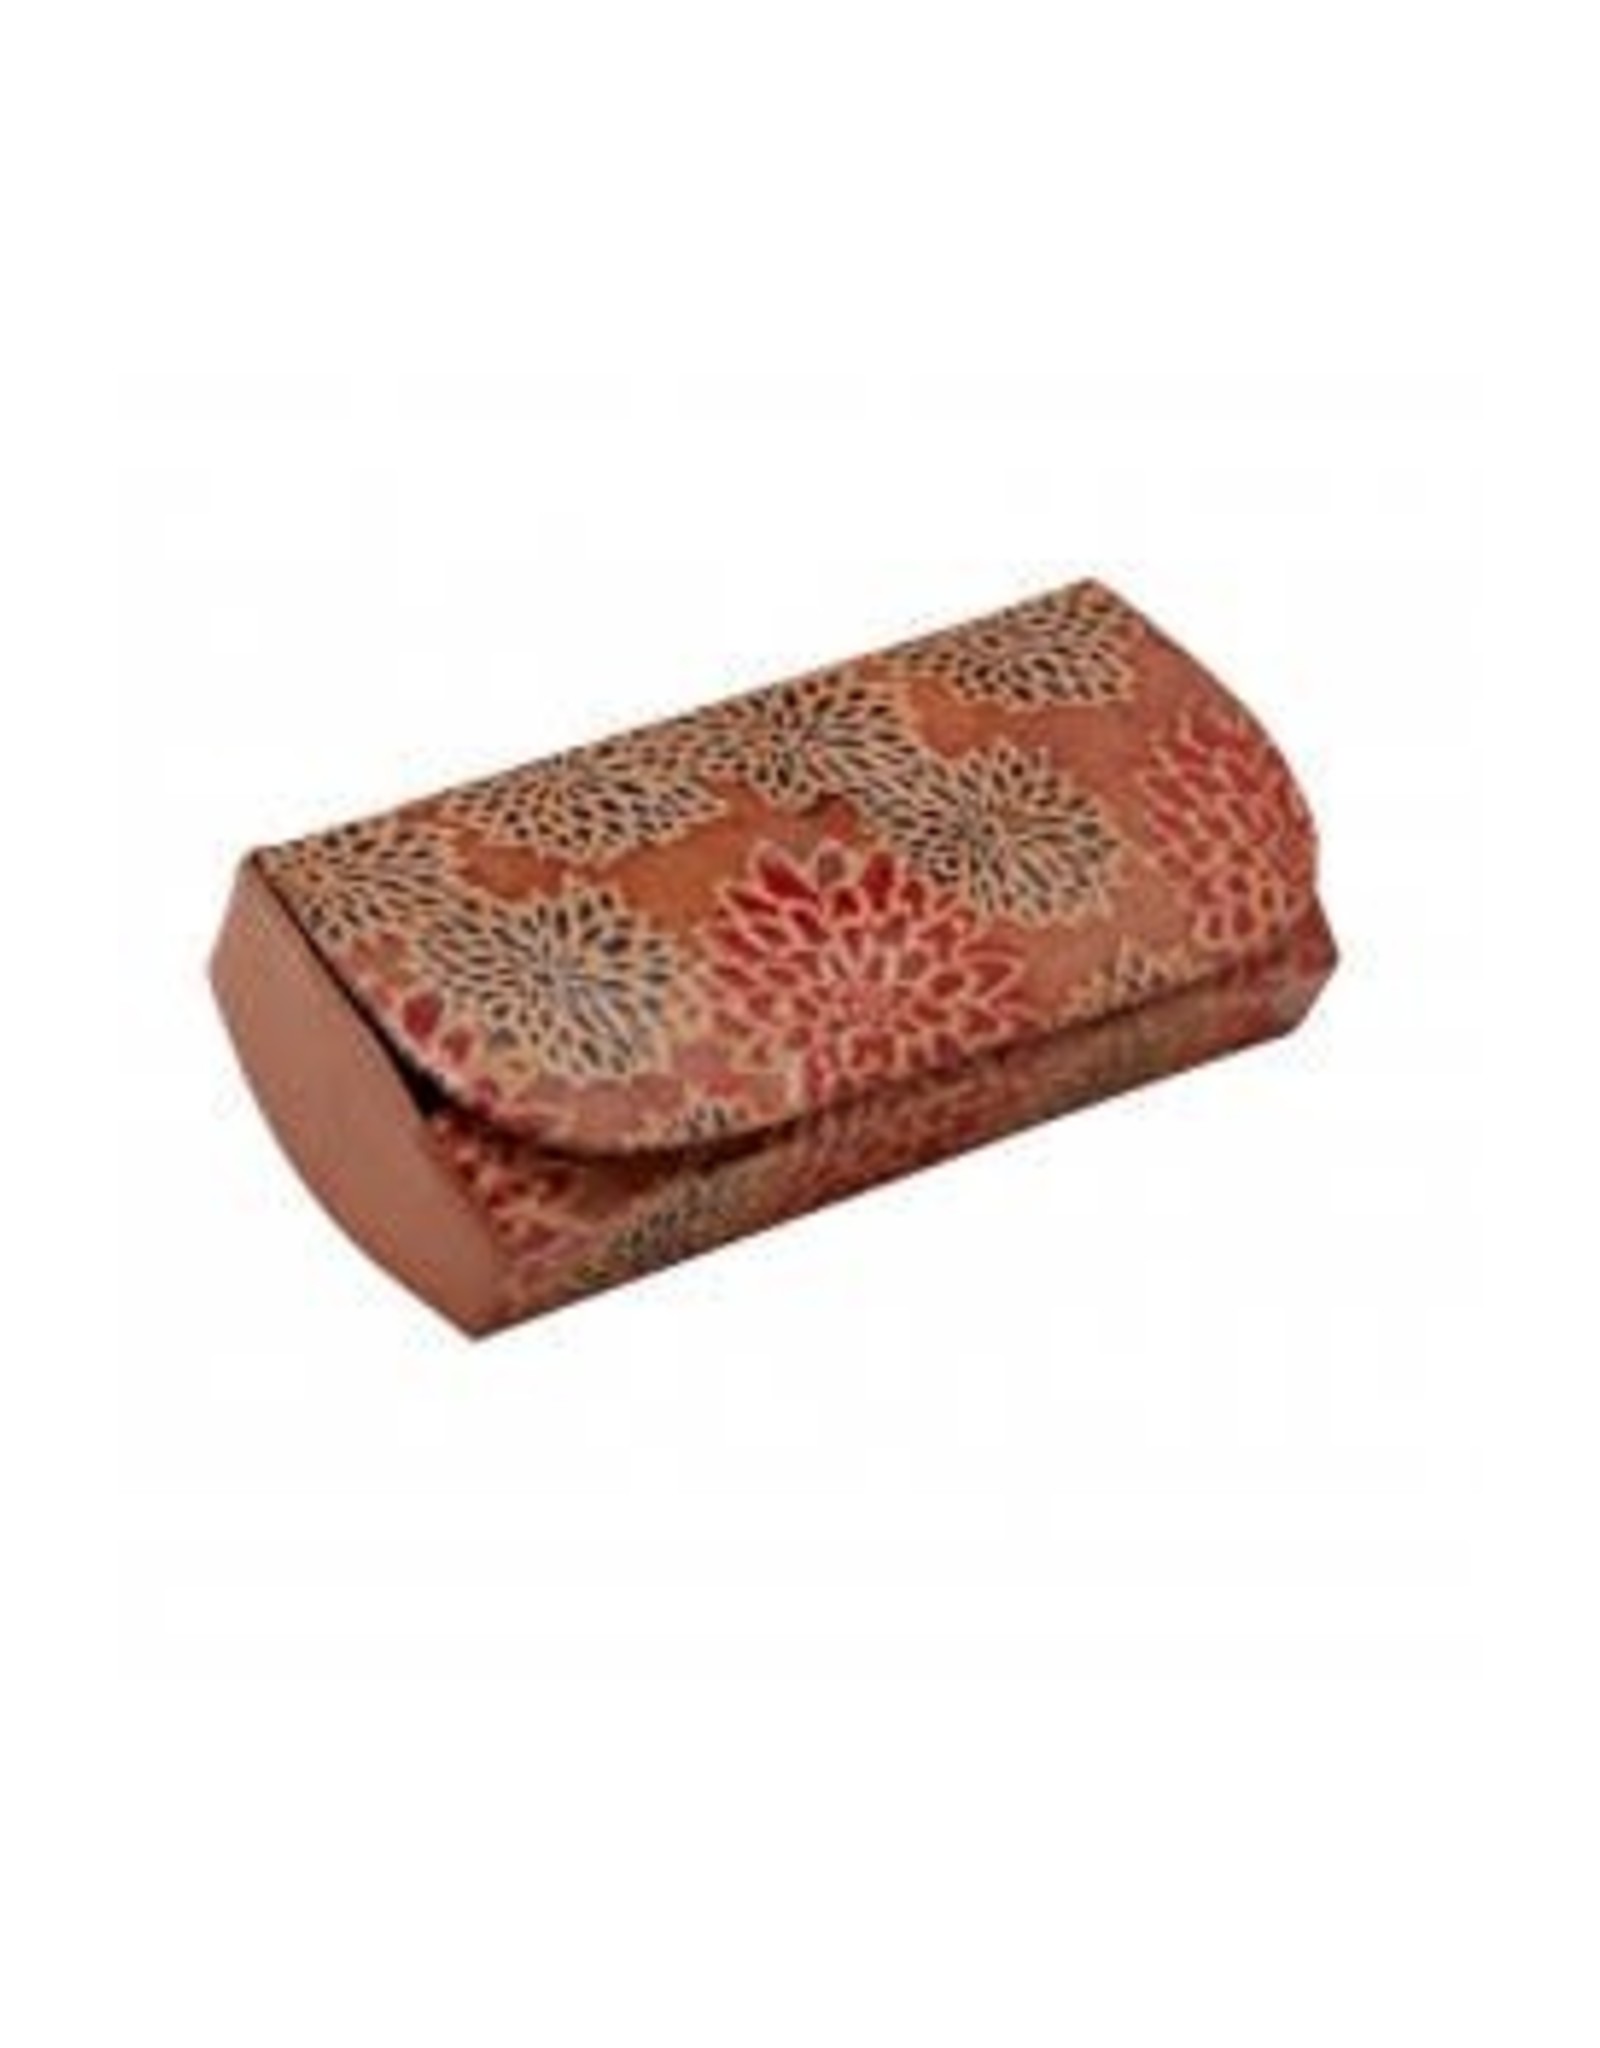 Trade roots Leather  Eyeglasses Case, Red, India